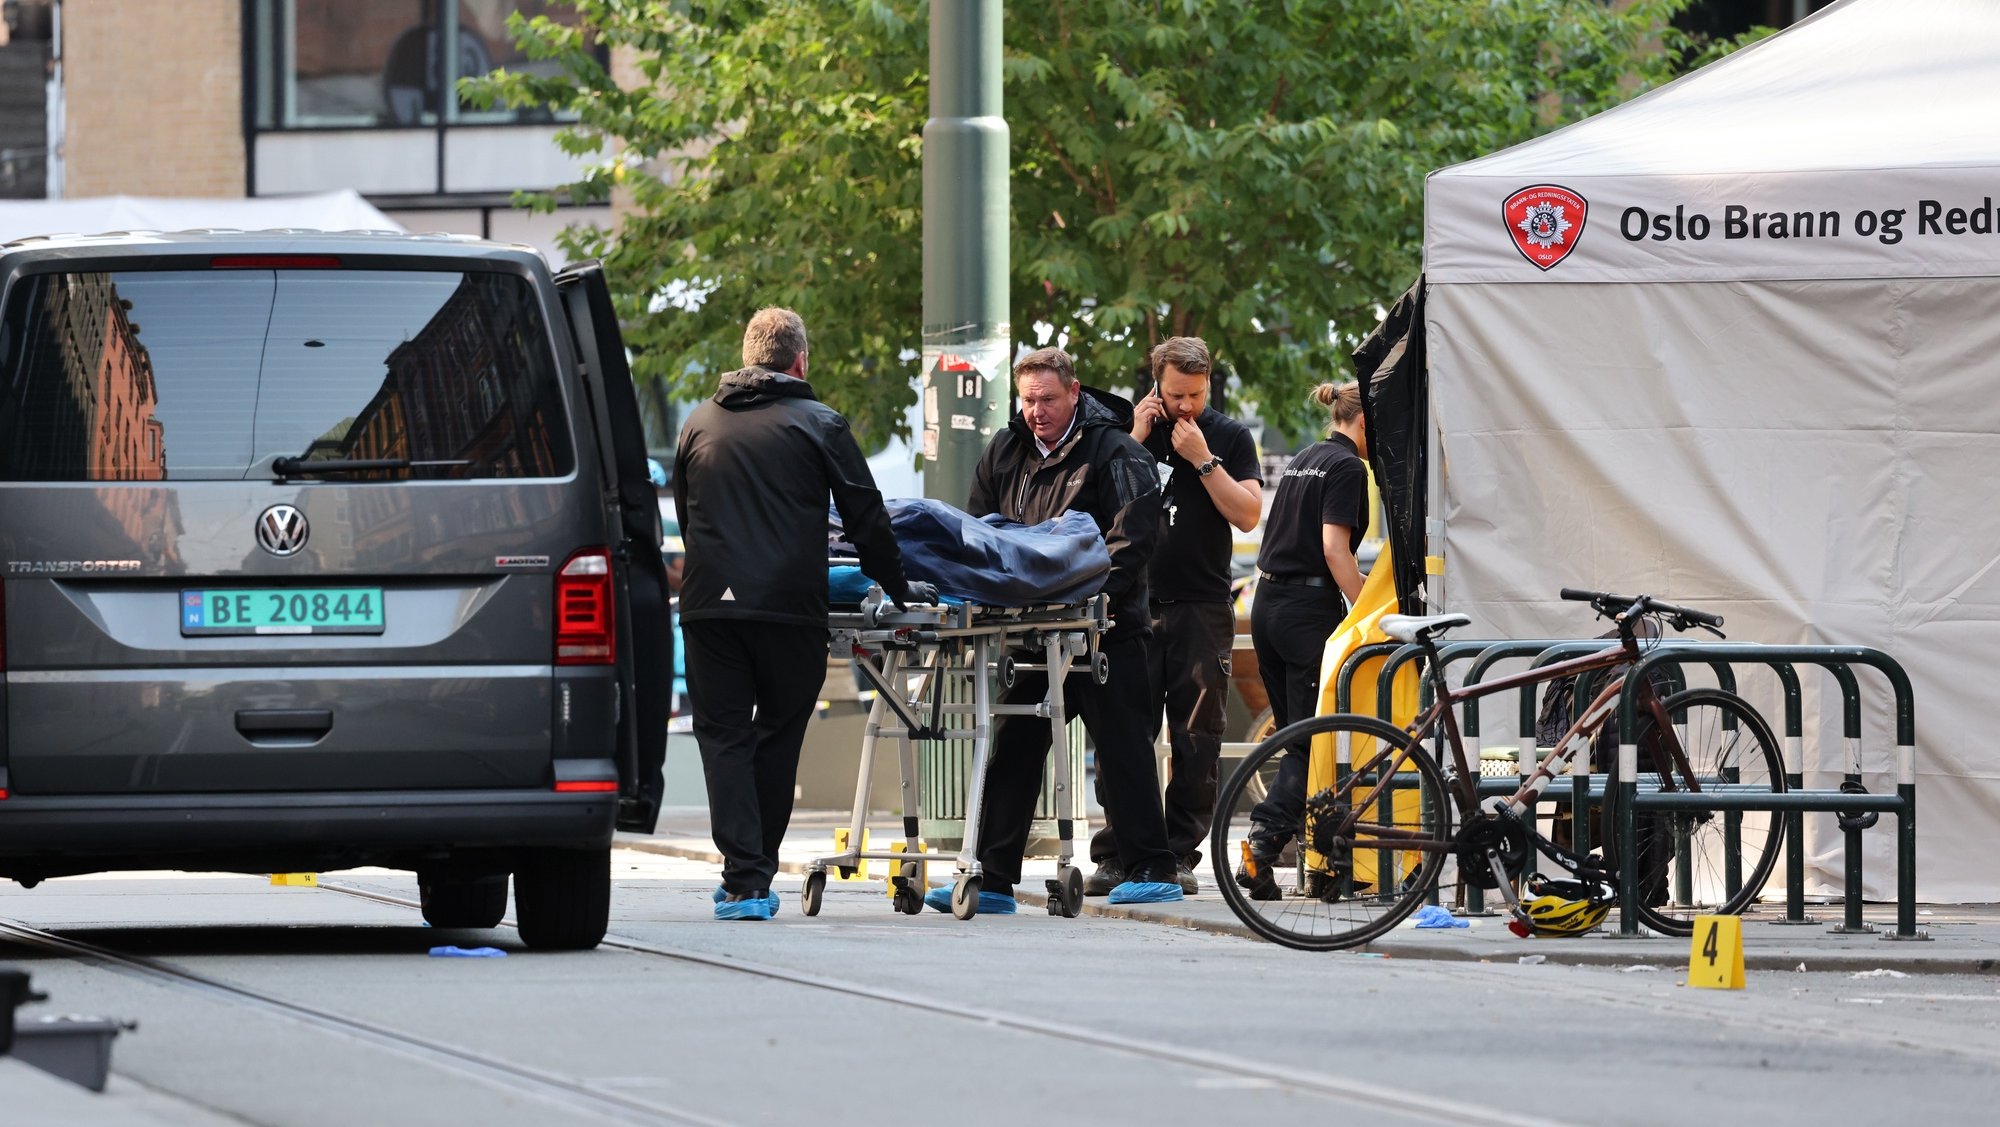 epa10033181 Police carry the body of a victim on a stretcher at a crime scene in the aftermath of overnight shootings in the center of Oslo, Norway, 25 June 2022. Two people were killed and at least 20 were injured when a gunman fired shots outside the London Pub, a gay bar and nightclub, and surrounding areas. The man was detained shortly after and charged with murder and terrorism.  EPA/Orn E. Borgen NORWAY OUT